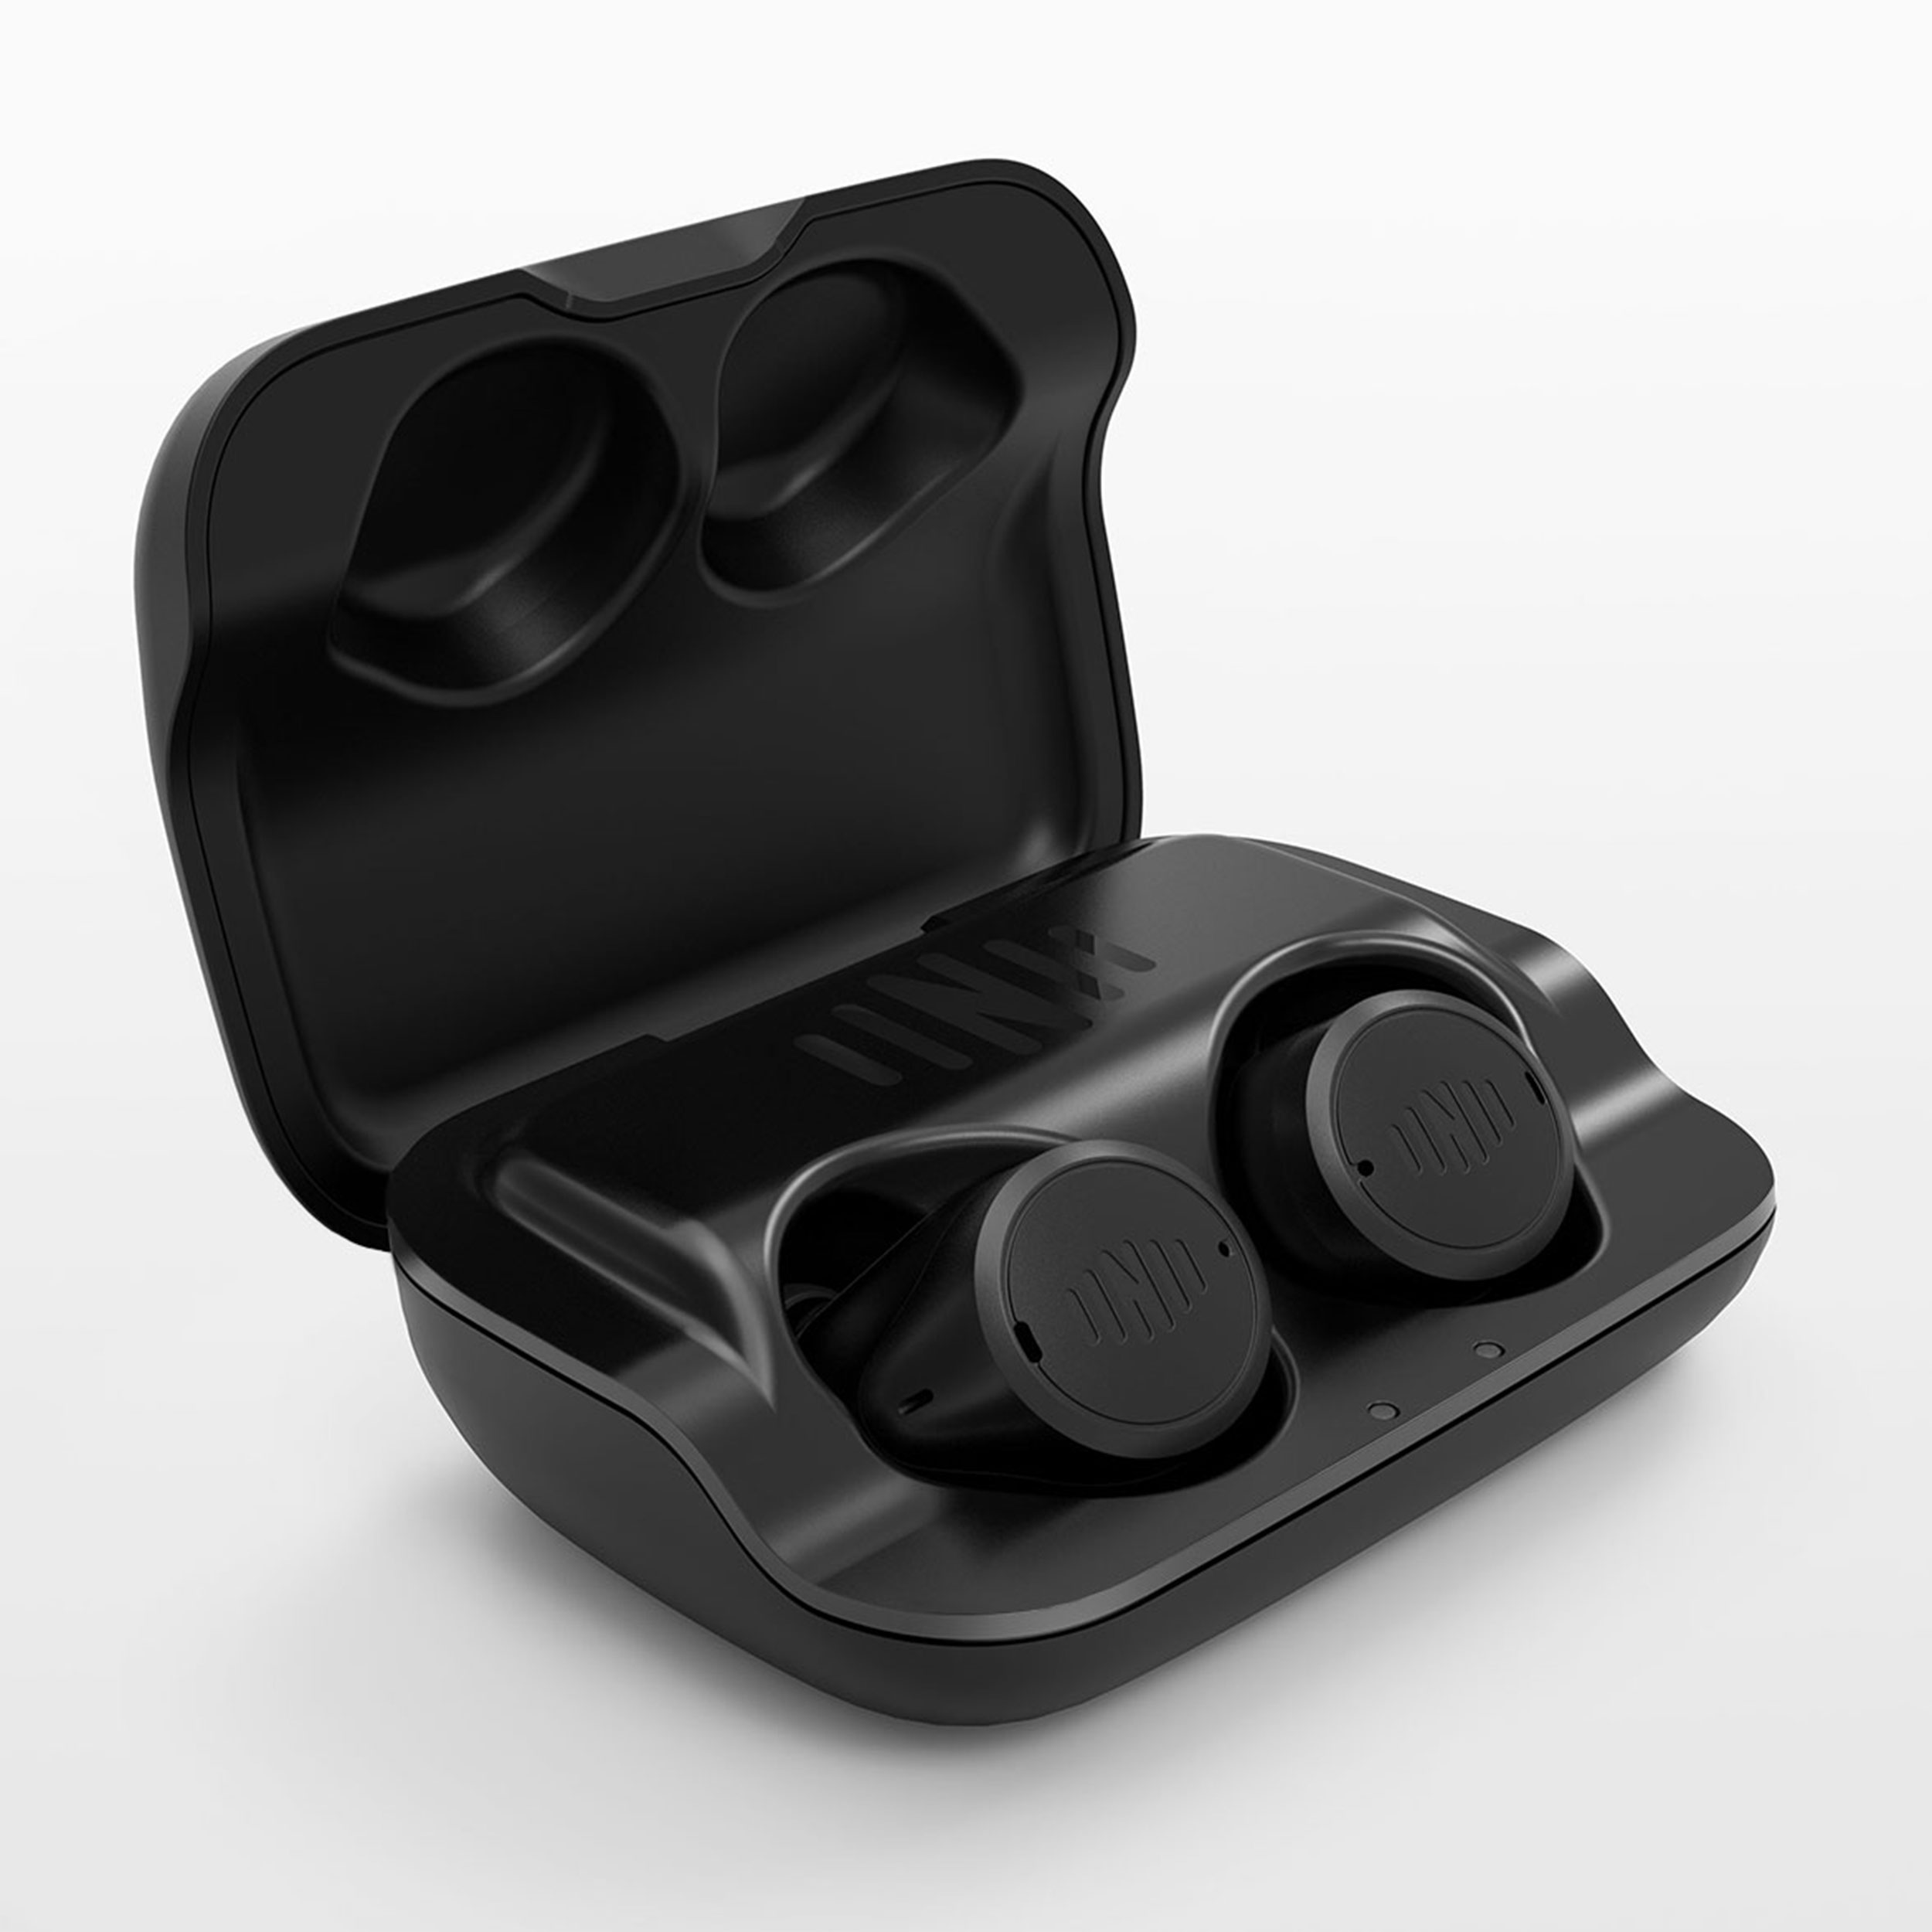 Nuheara IQ Buds Max 2 Earbud Case in Open Position revealing Earbuds